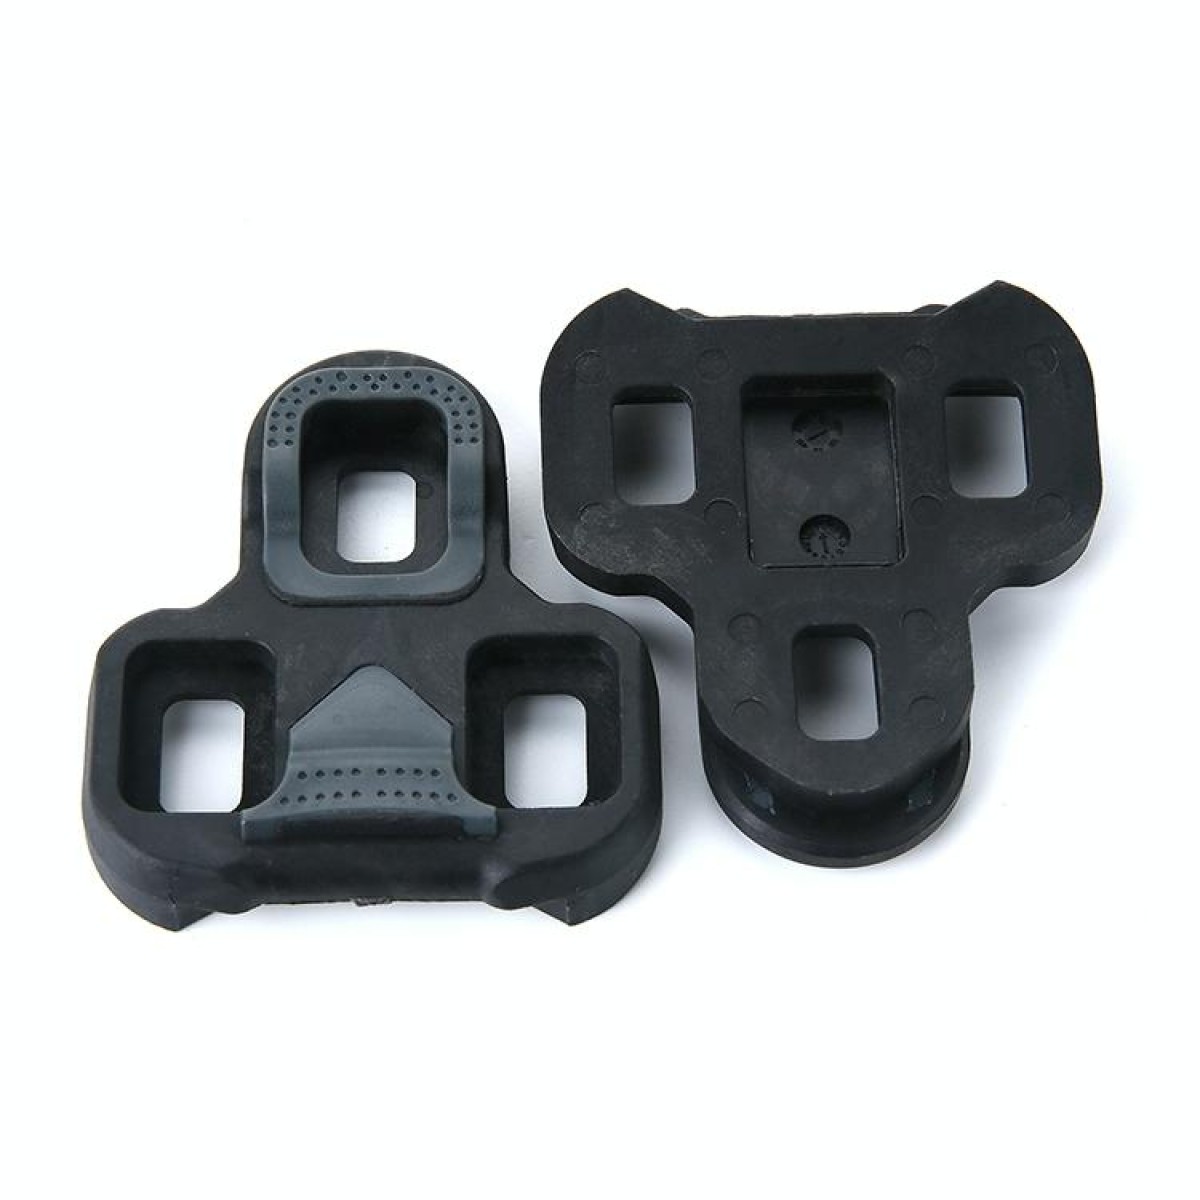 RD3 Road Bike Cleats 4.5 Degree Floating Self-locking Cycling Pedal Cleat for Look KEO Road Cleats Fit Most Road Bicycle Shoes